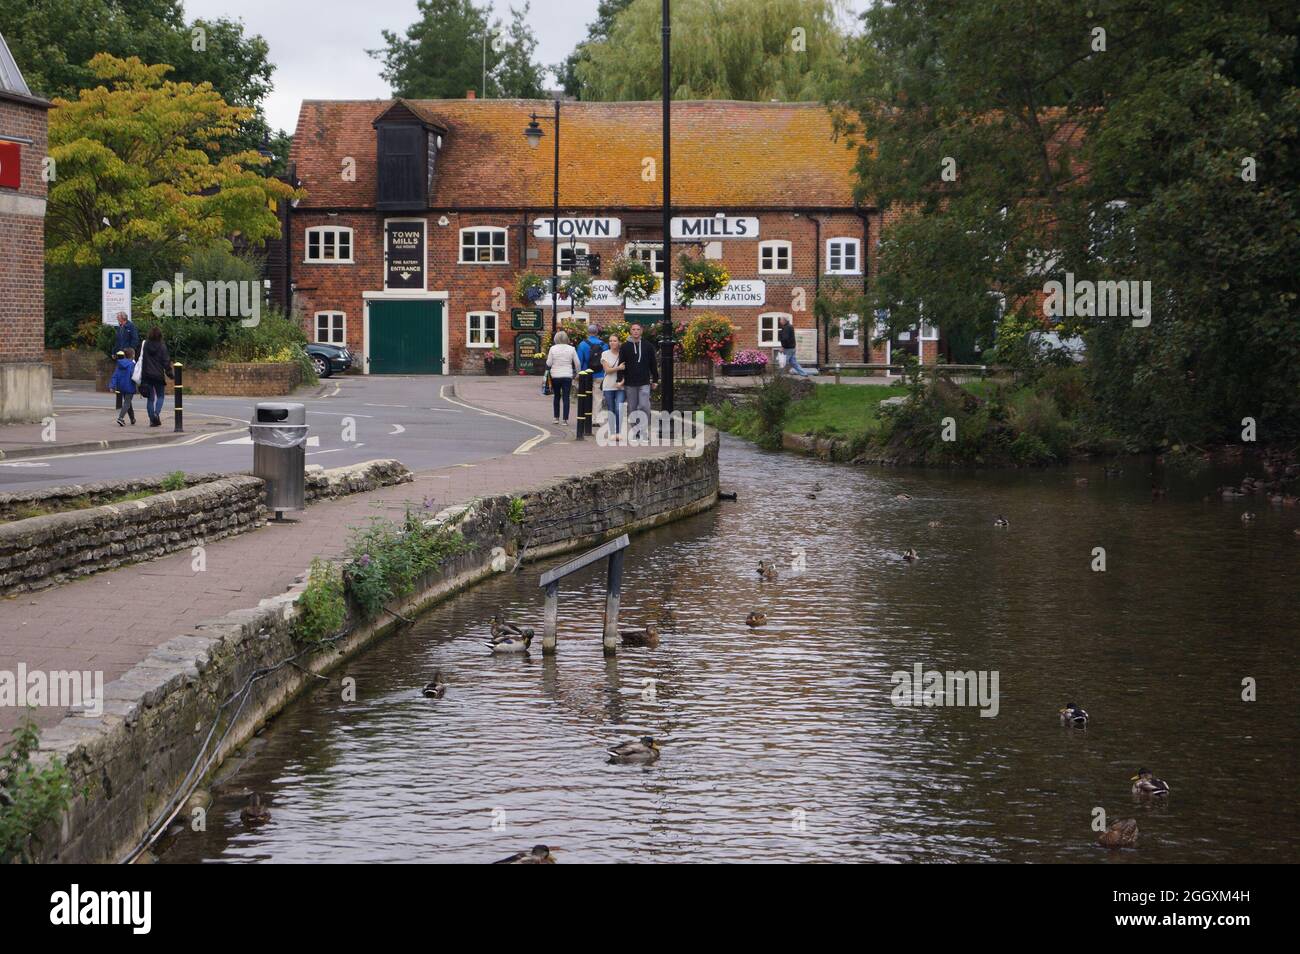 Andover, Hampshire (UK): a view of river Aton, Bridge Street and the Town Mills pub Stock Photo